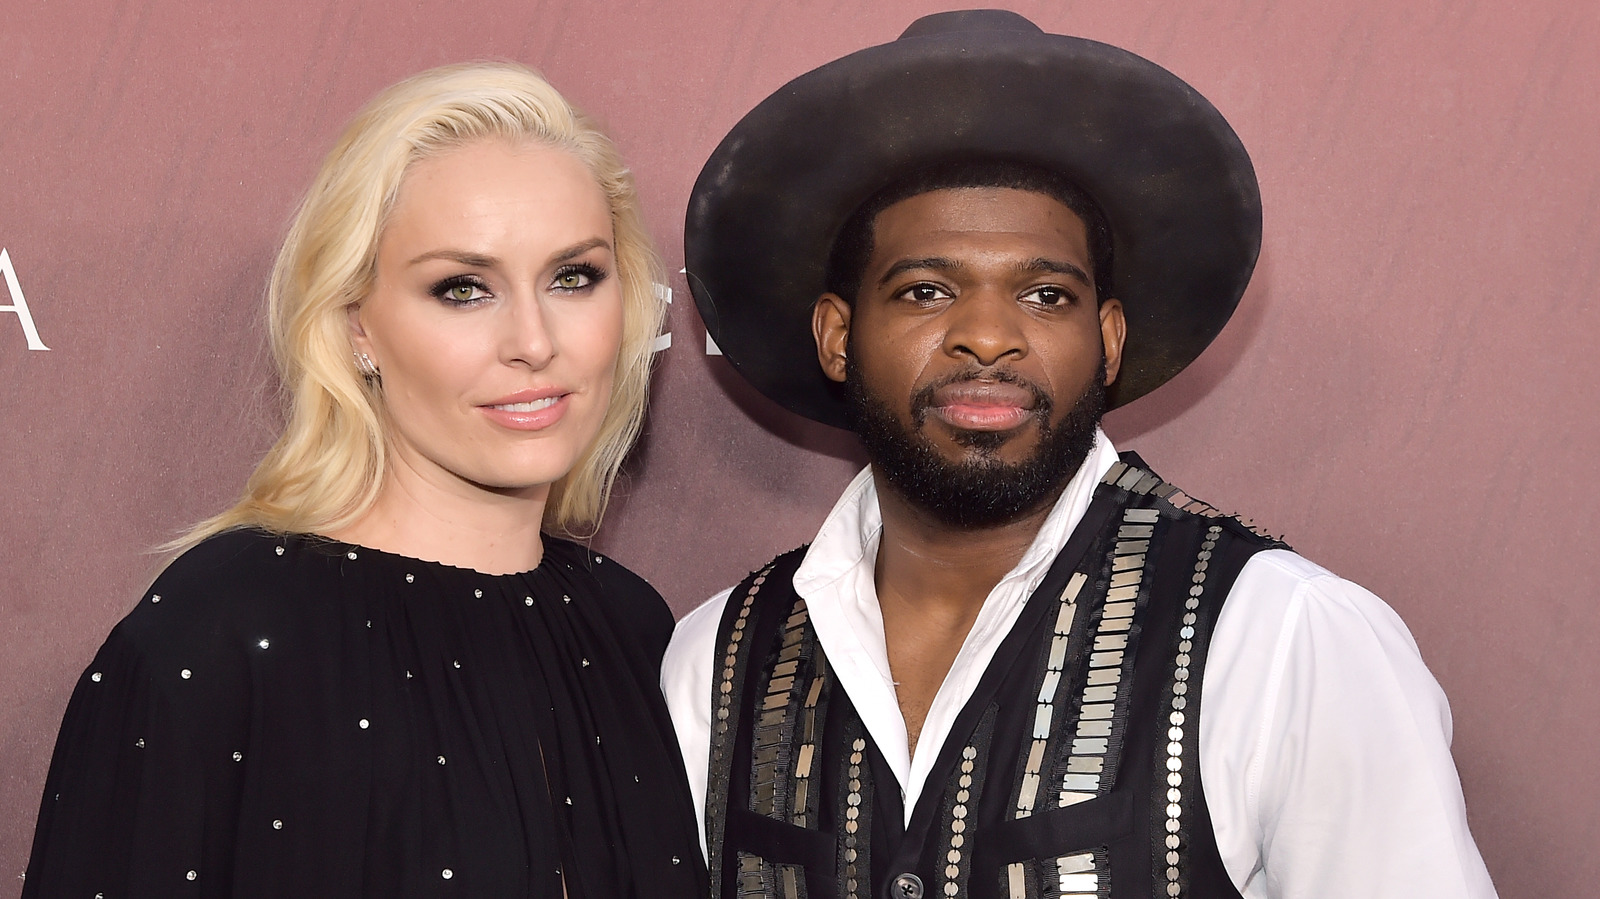 Lindsey Vonn 'Looking at Summer' for Wedding With P.K. Subban